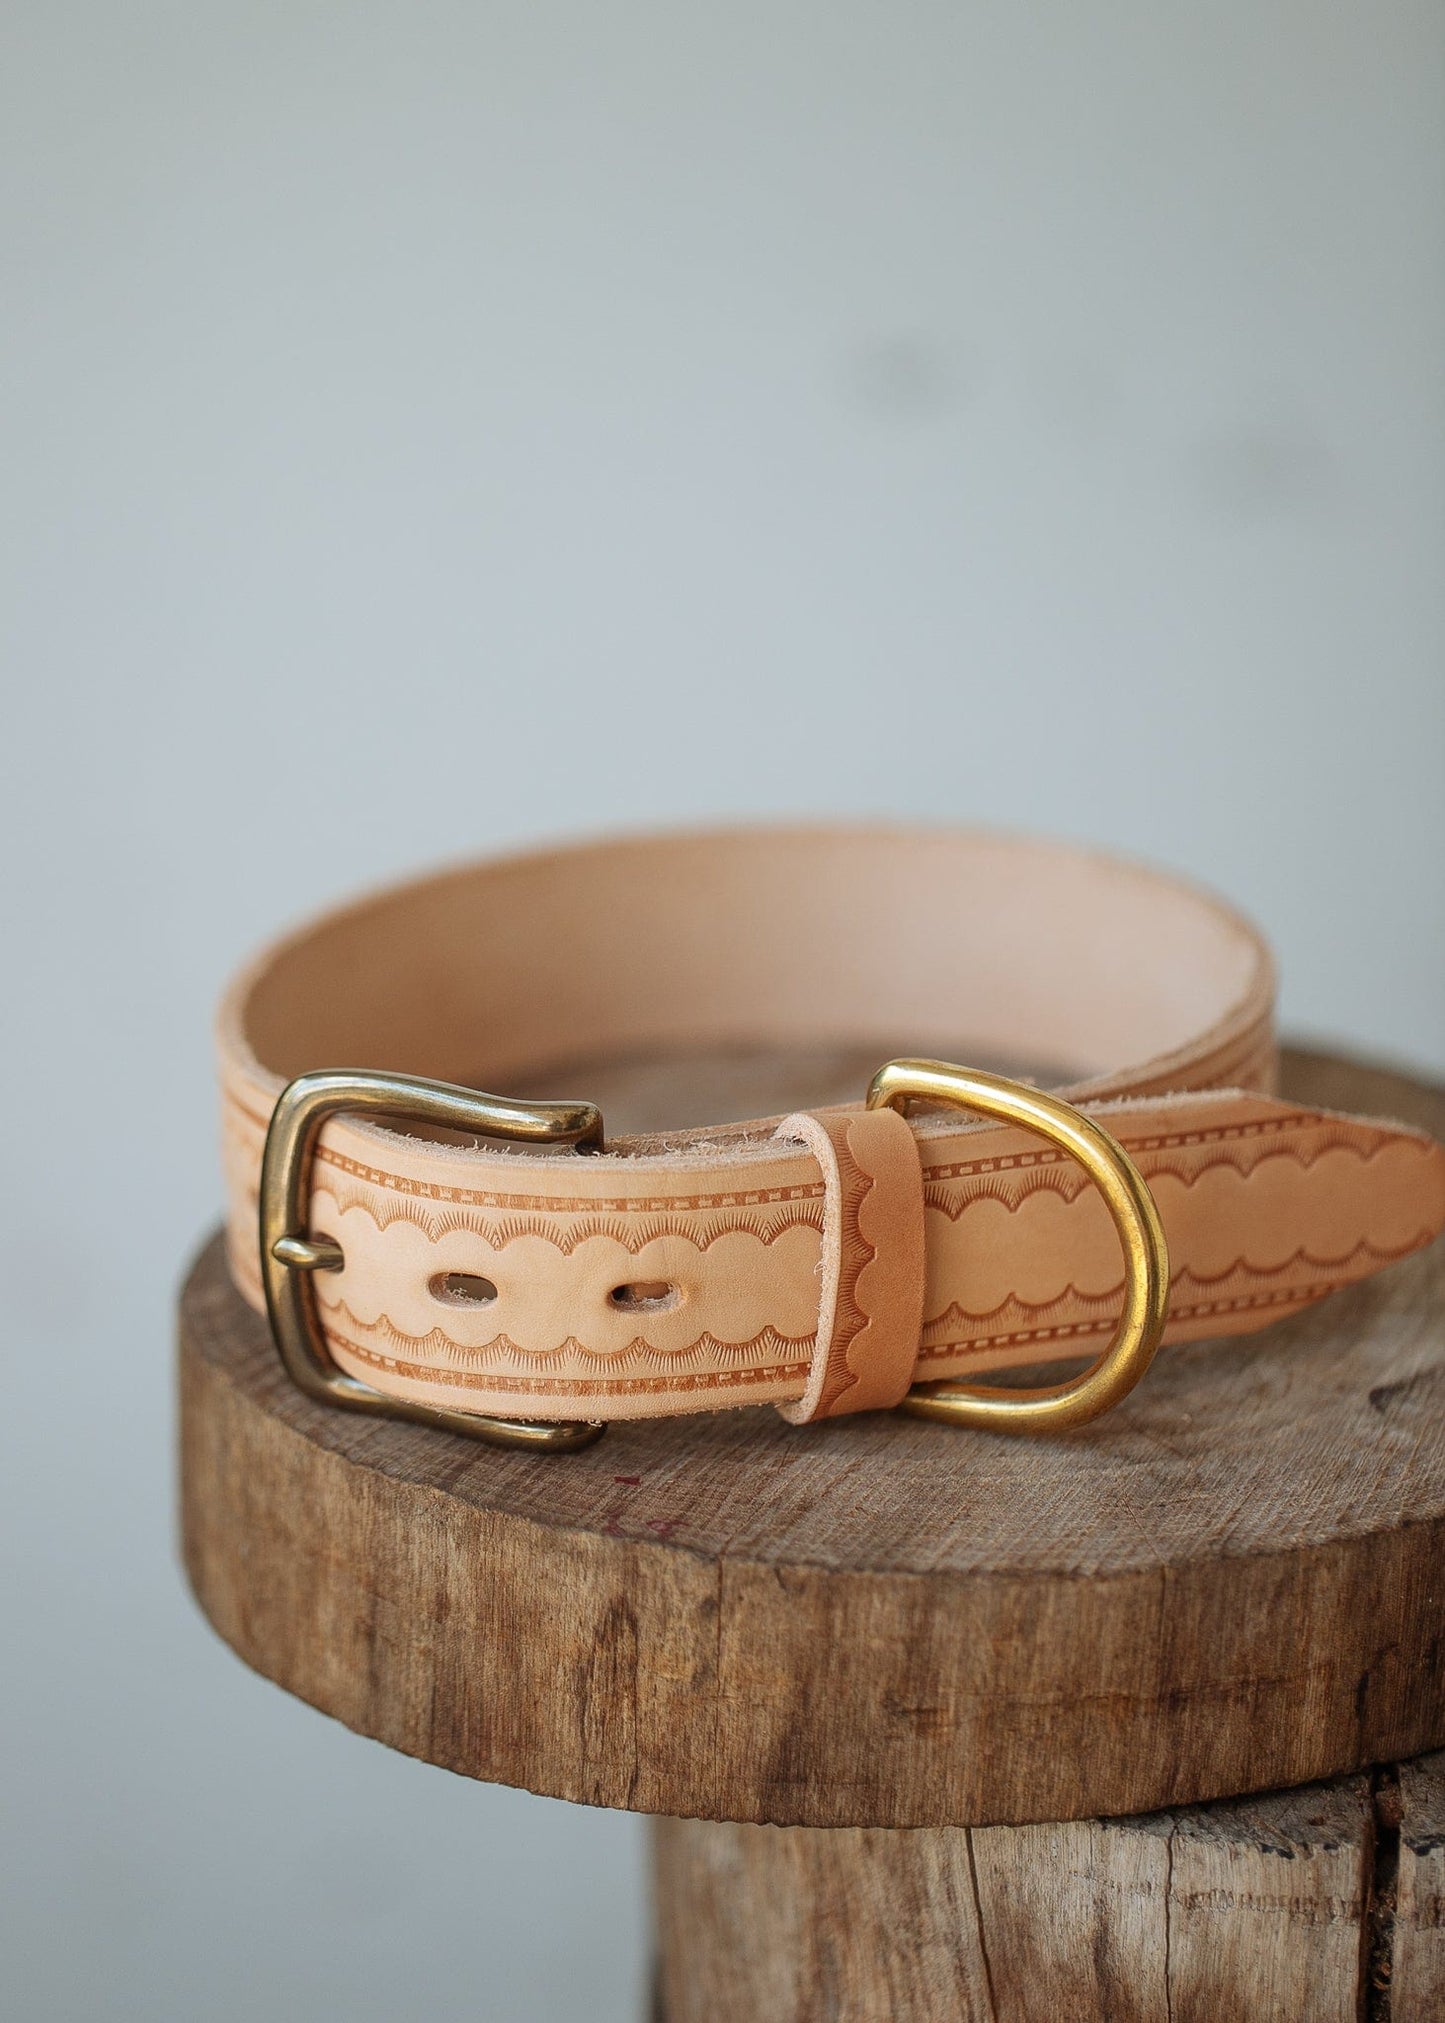 The Real McCaul Leathergoods Pet Collars & Harnesses Embossed Dog Collar - Scallop - 38mm - Natural Australian Made Australian Owned Leather Dog Collar with Brass Fittings- Australian Made